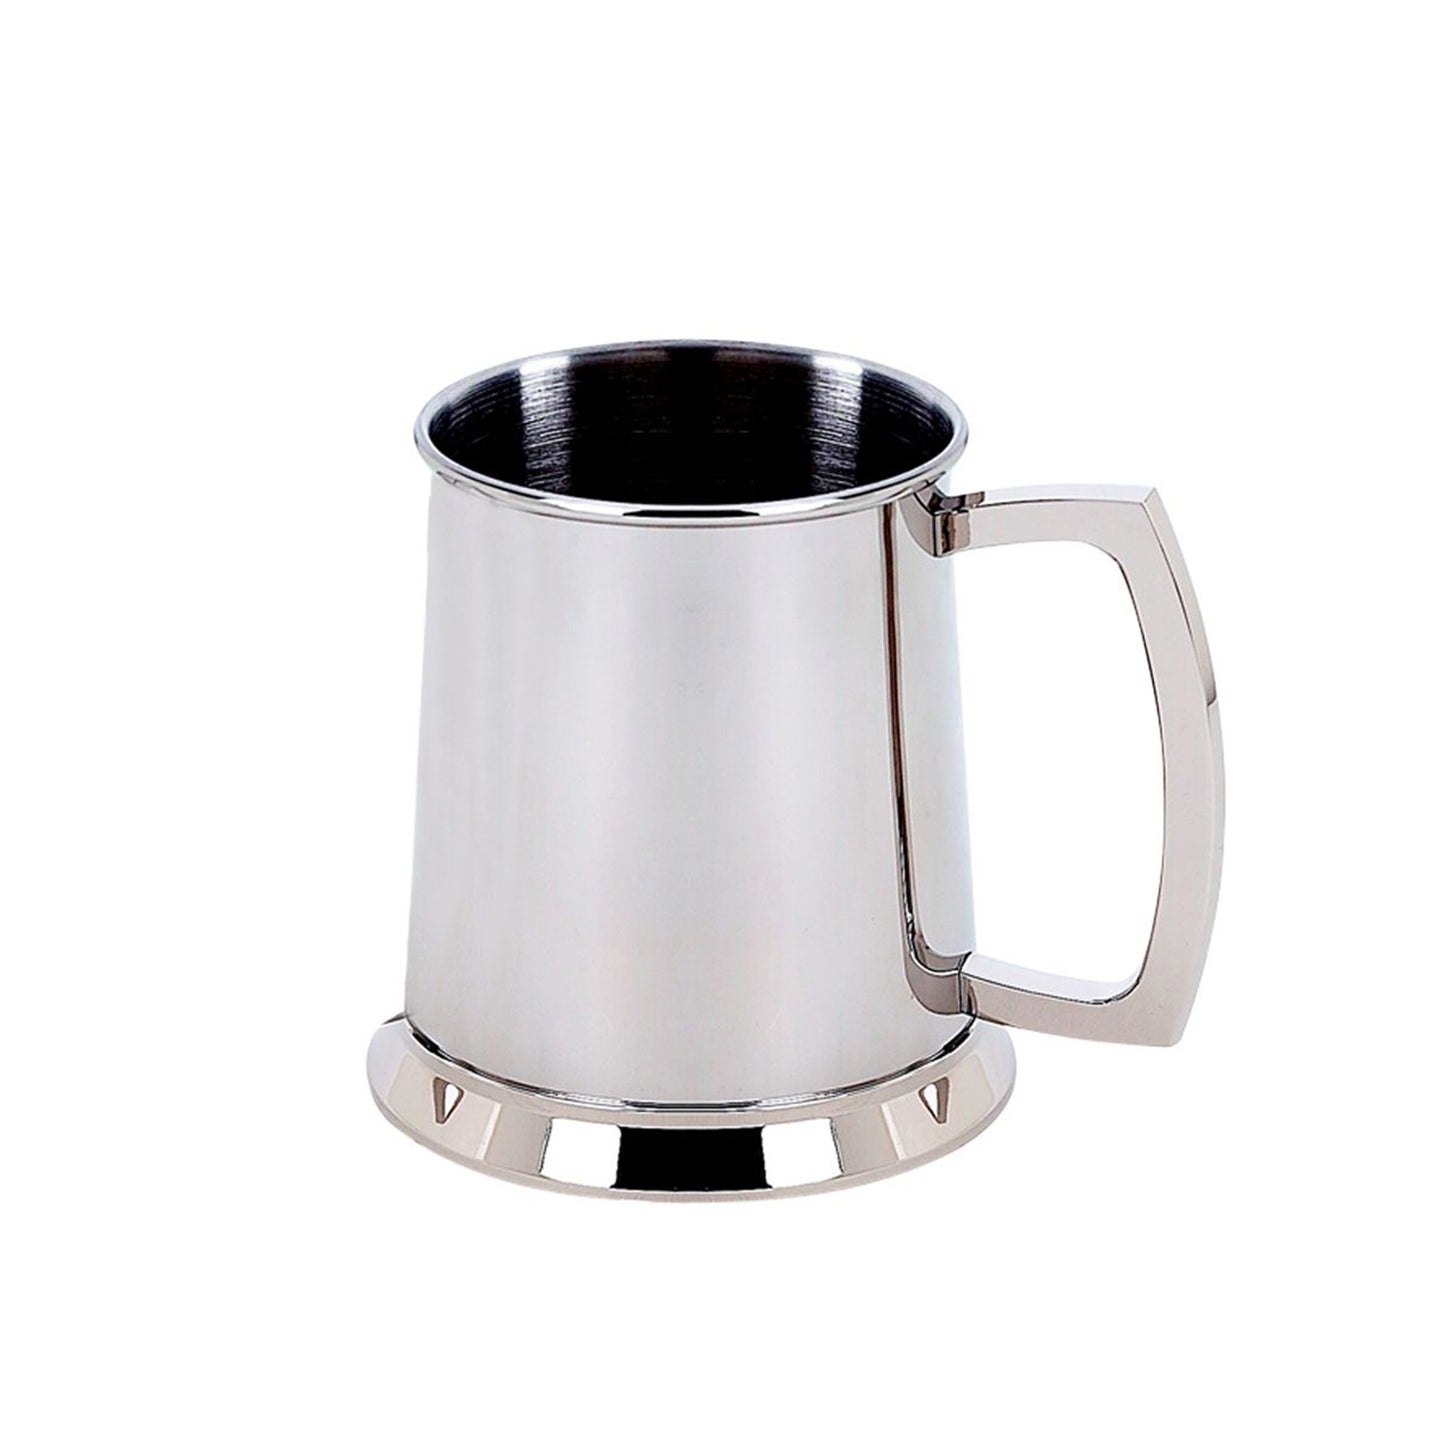 Stainless Steel Tankard with Bright Polished Finish - 20 oz